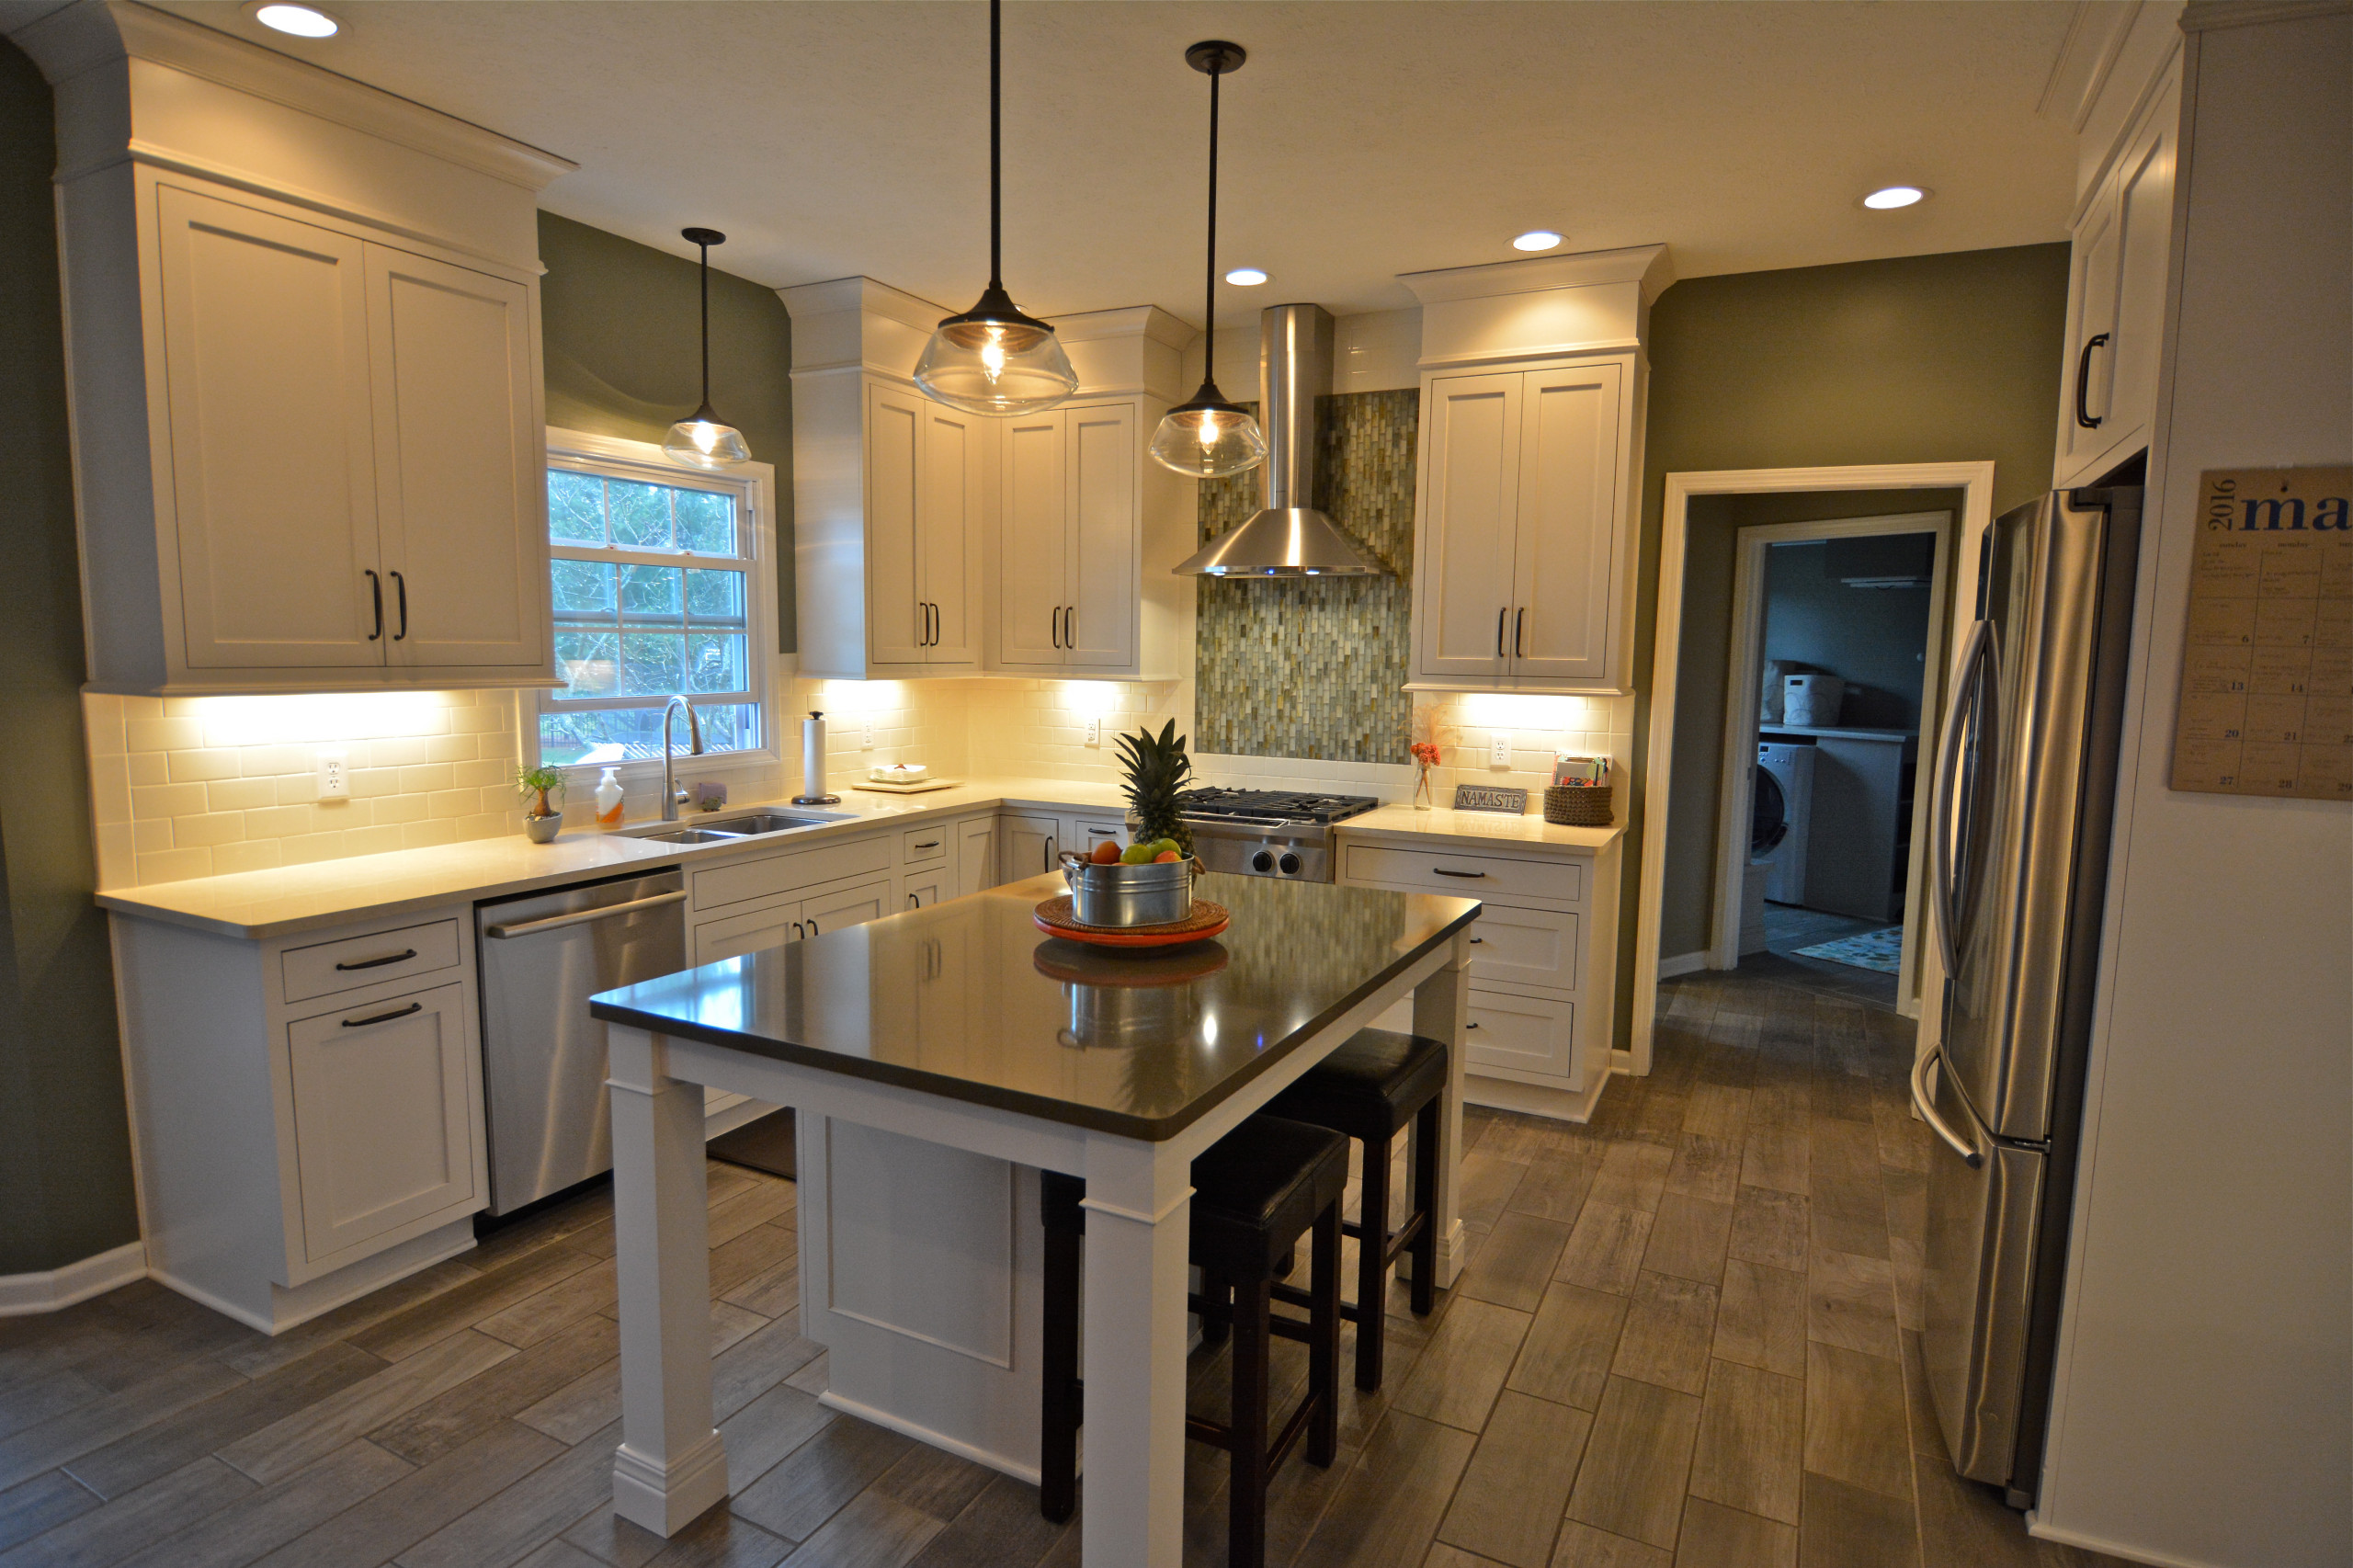 Chateau Kitchens & Home Remodeling, Carmel IN